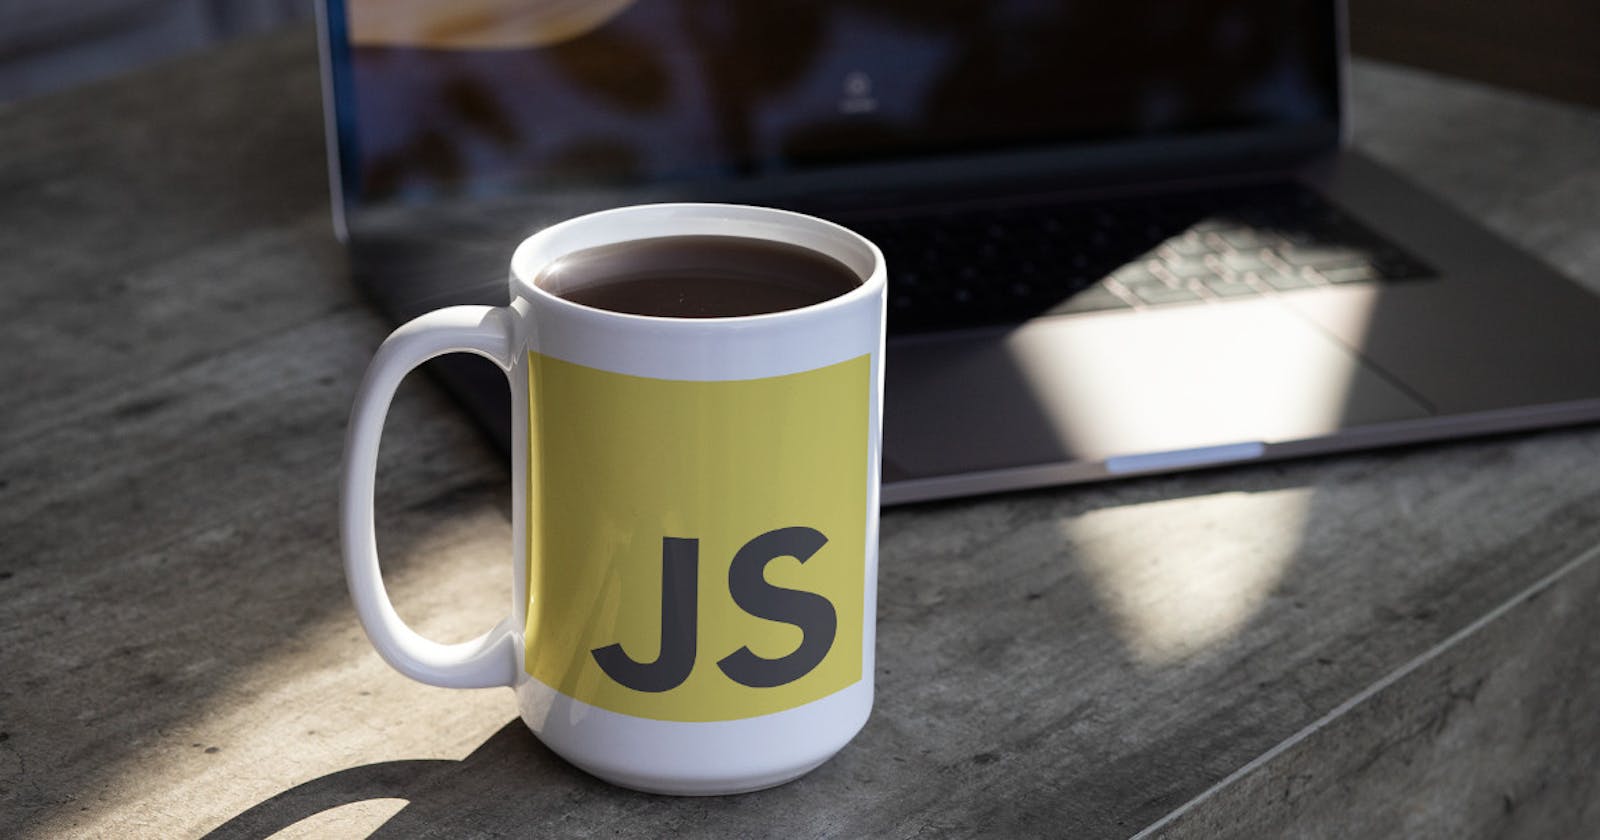 3 JavaScript Features From 2020 That Will Make Your Life Easier